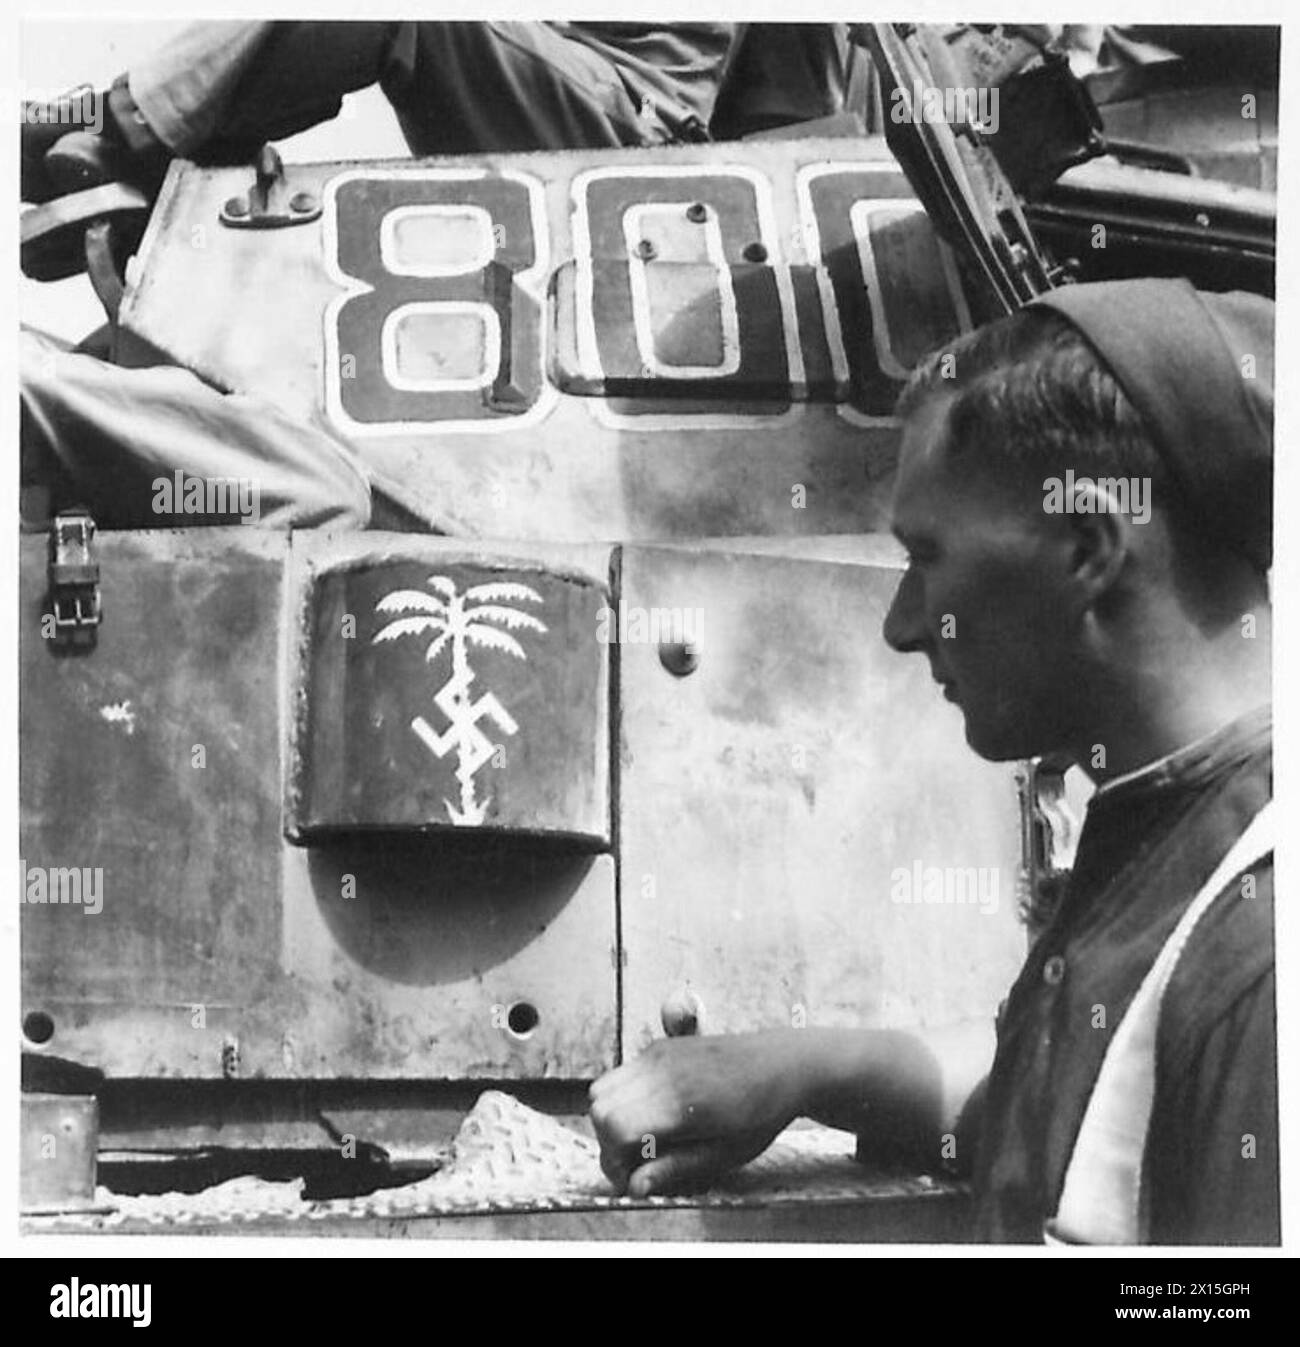 CAPTURED ENEMY TANKS - The Afrika Korps sign on a German tank , British Army Stock Photo